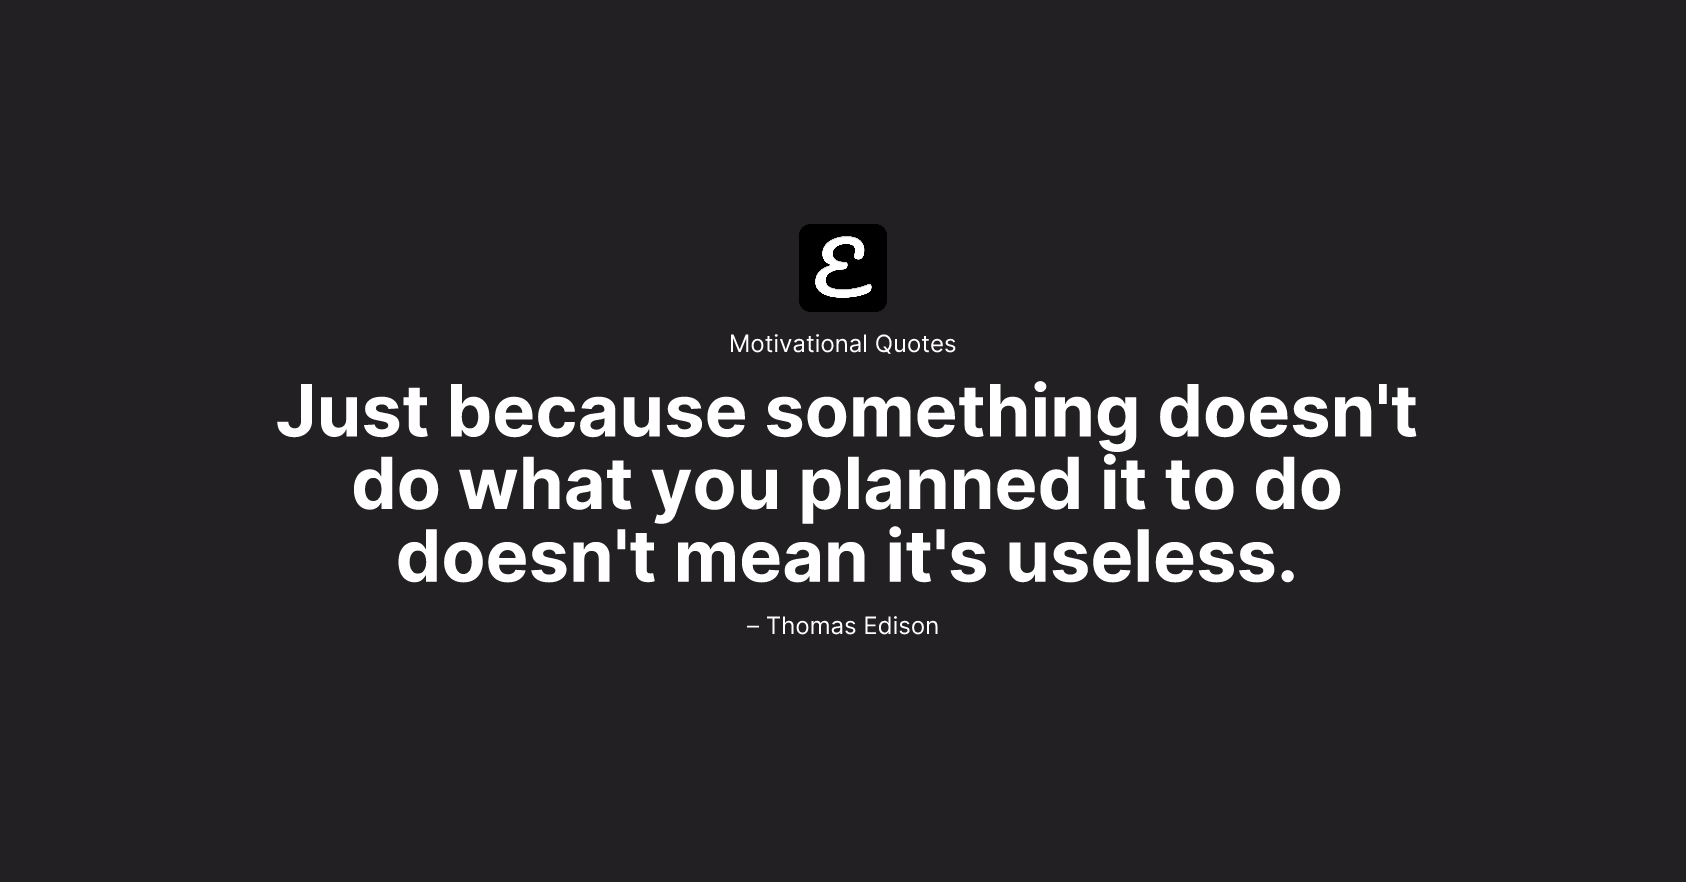 Thomas Edison - Just because something doesn't do what you planned it to do doesn't mean it's useless.